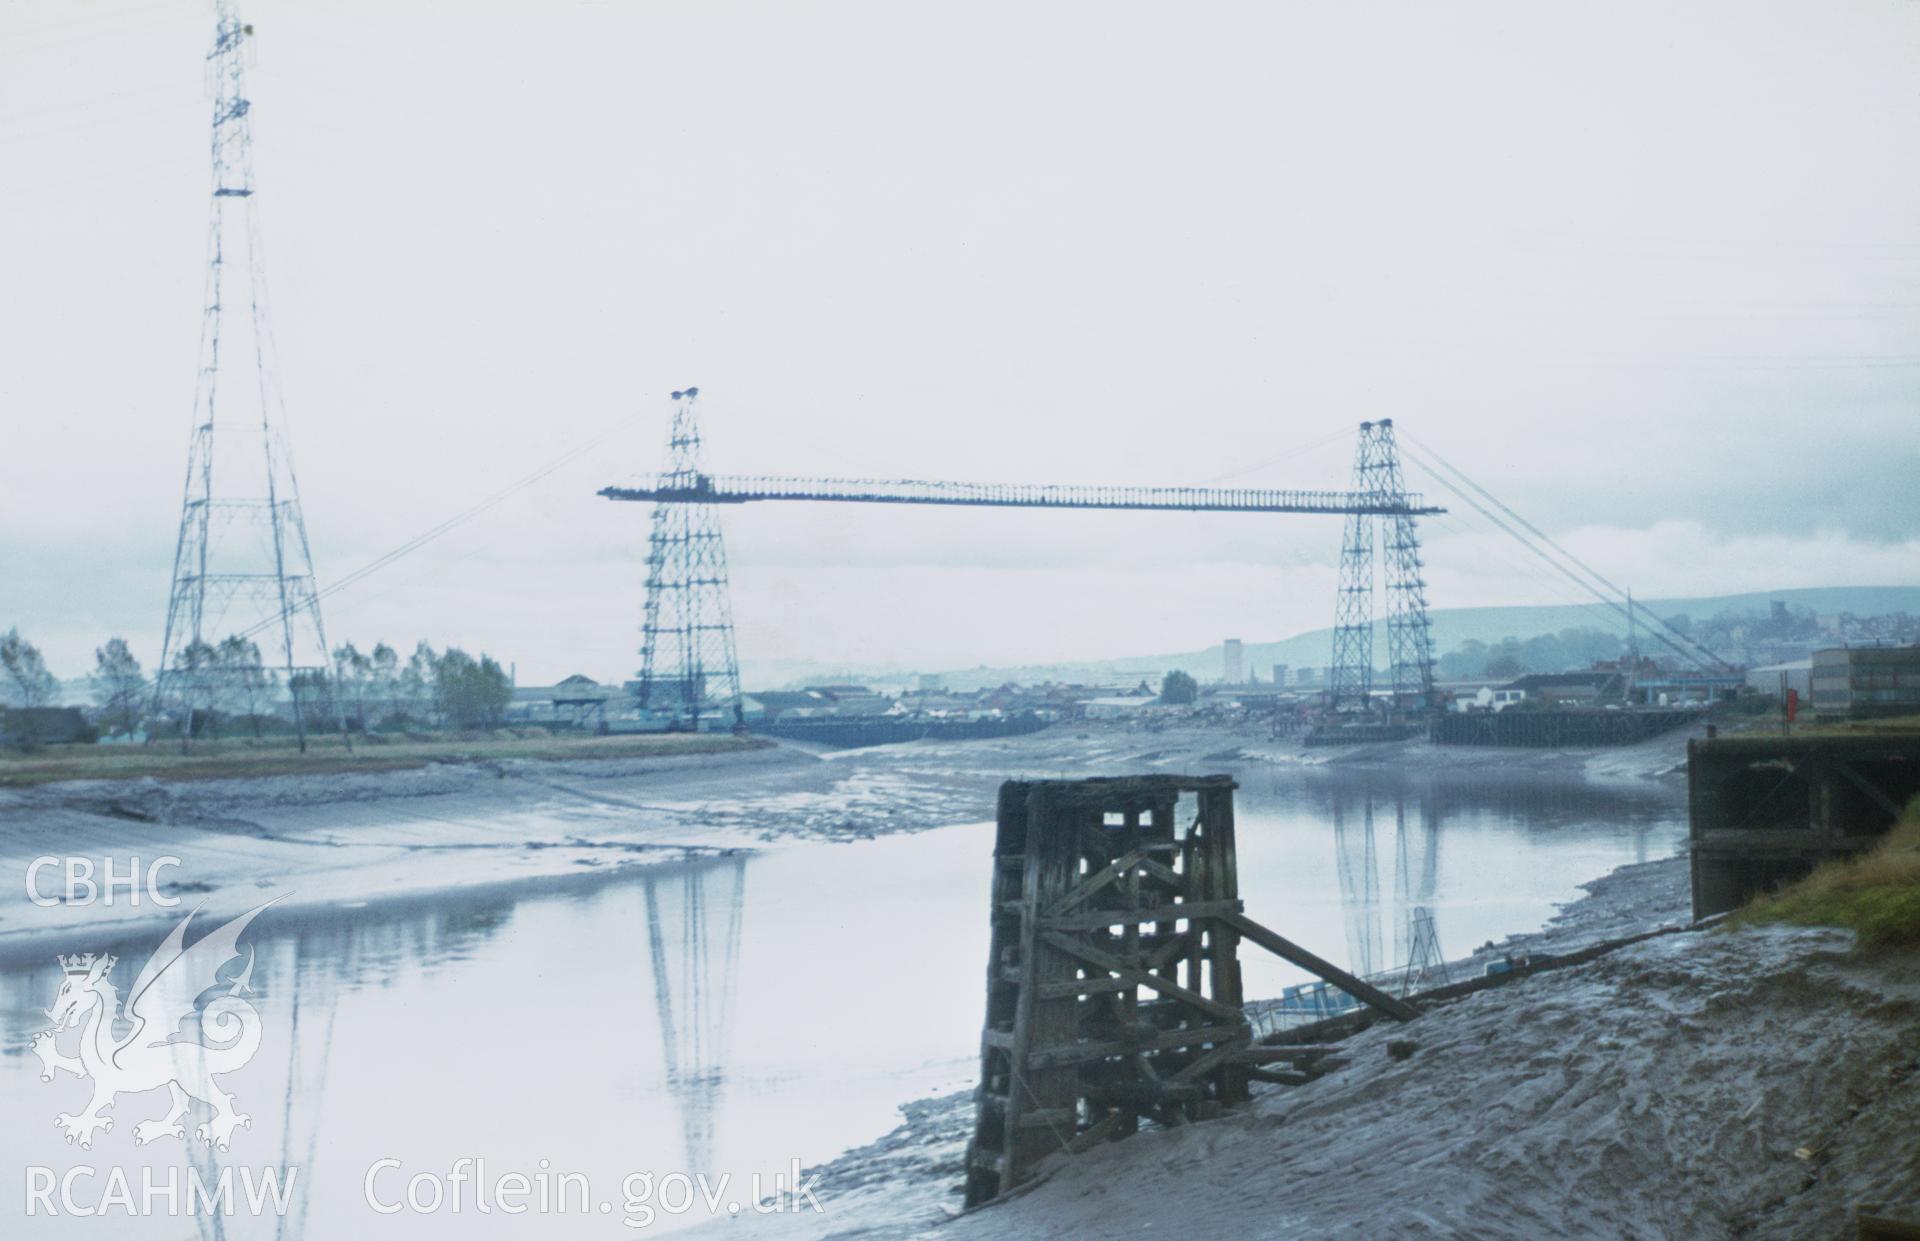 35mm colour slide showing Transporter Bridge, Newport, Monmouthshire by Dylan Roberts, undated.